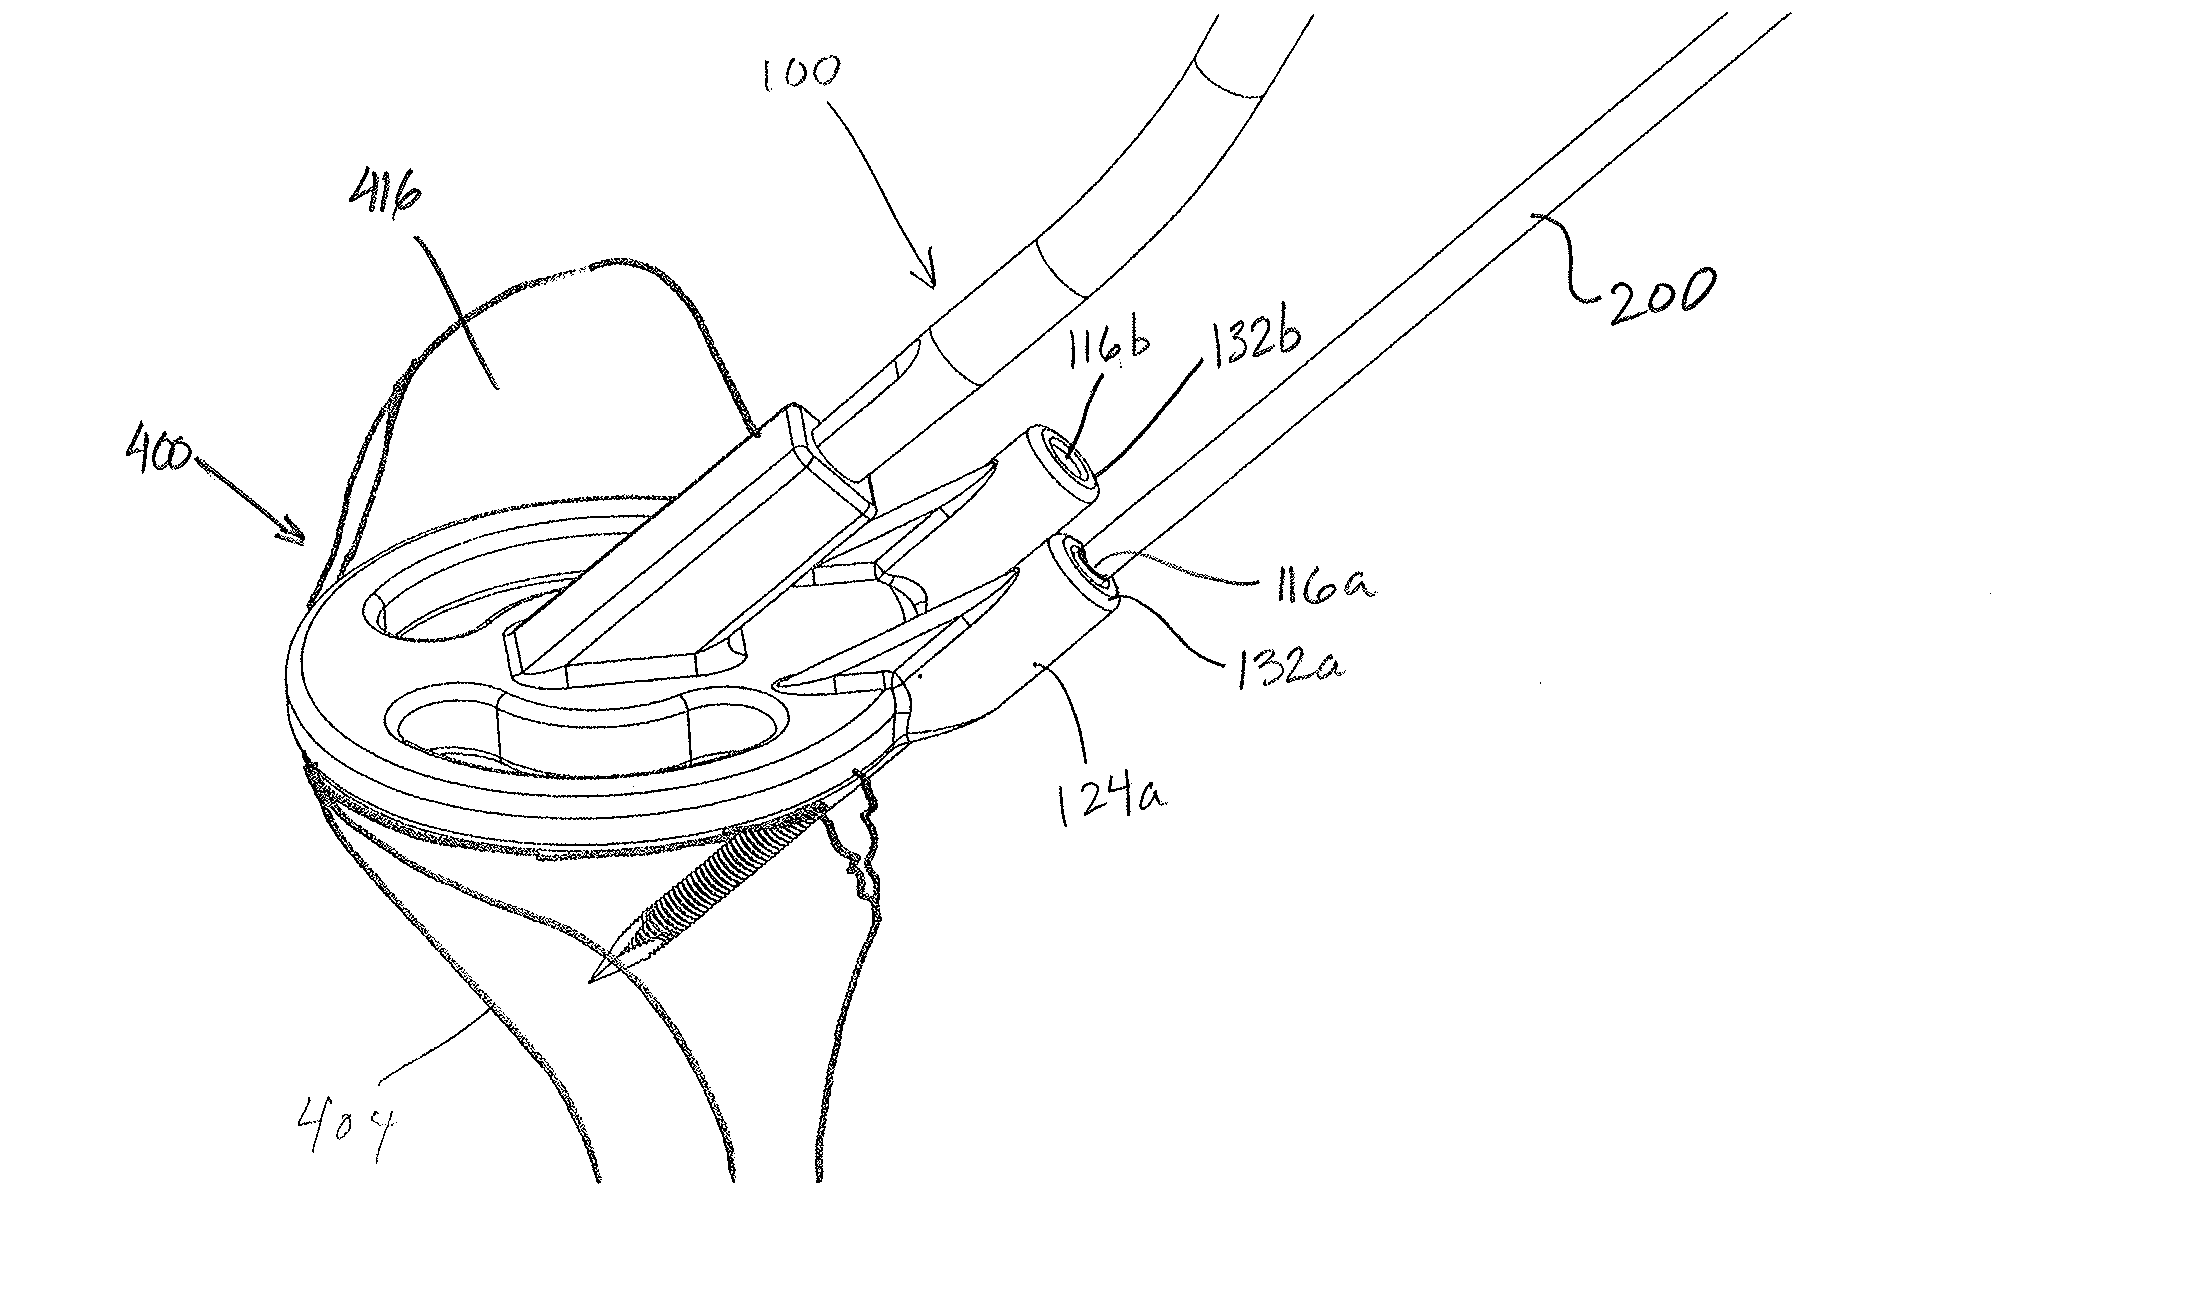 Devices, apparatuses, kits, and methods for repair of articular surface and/or articular rim